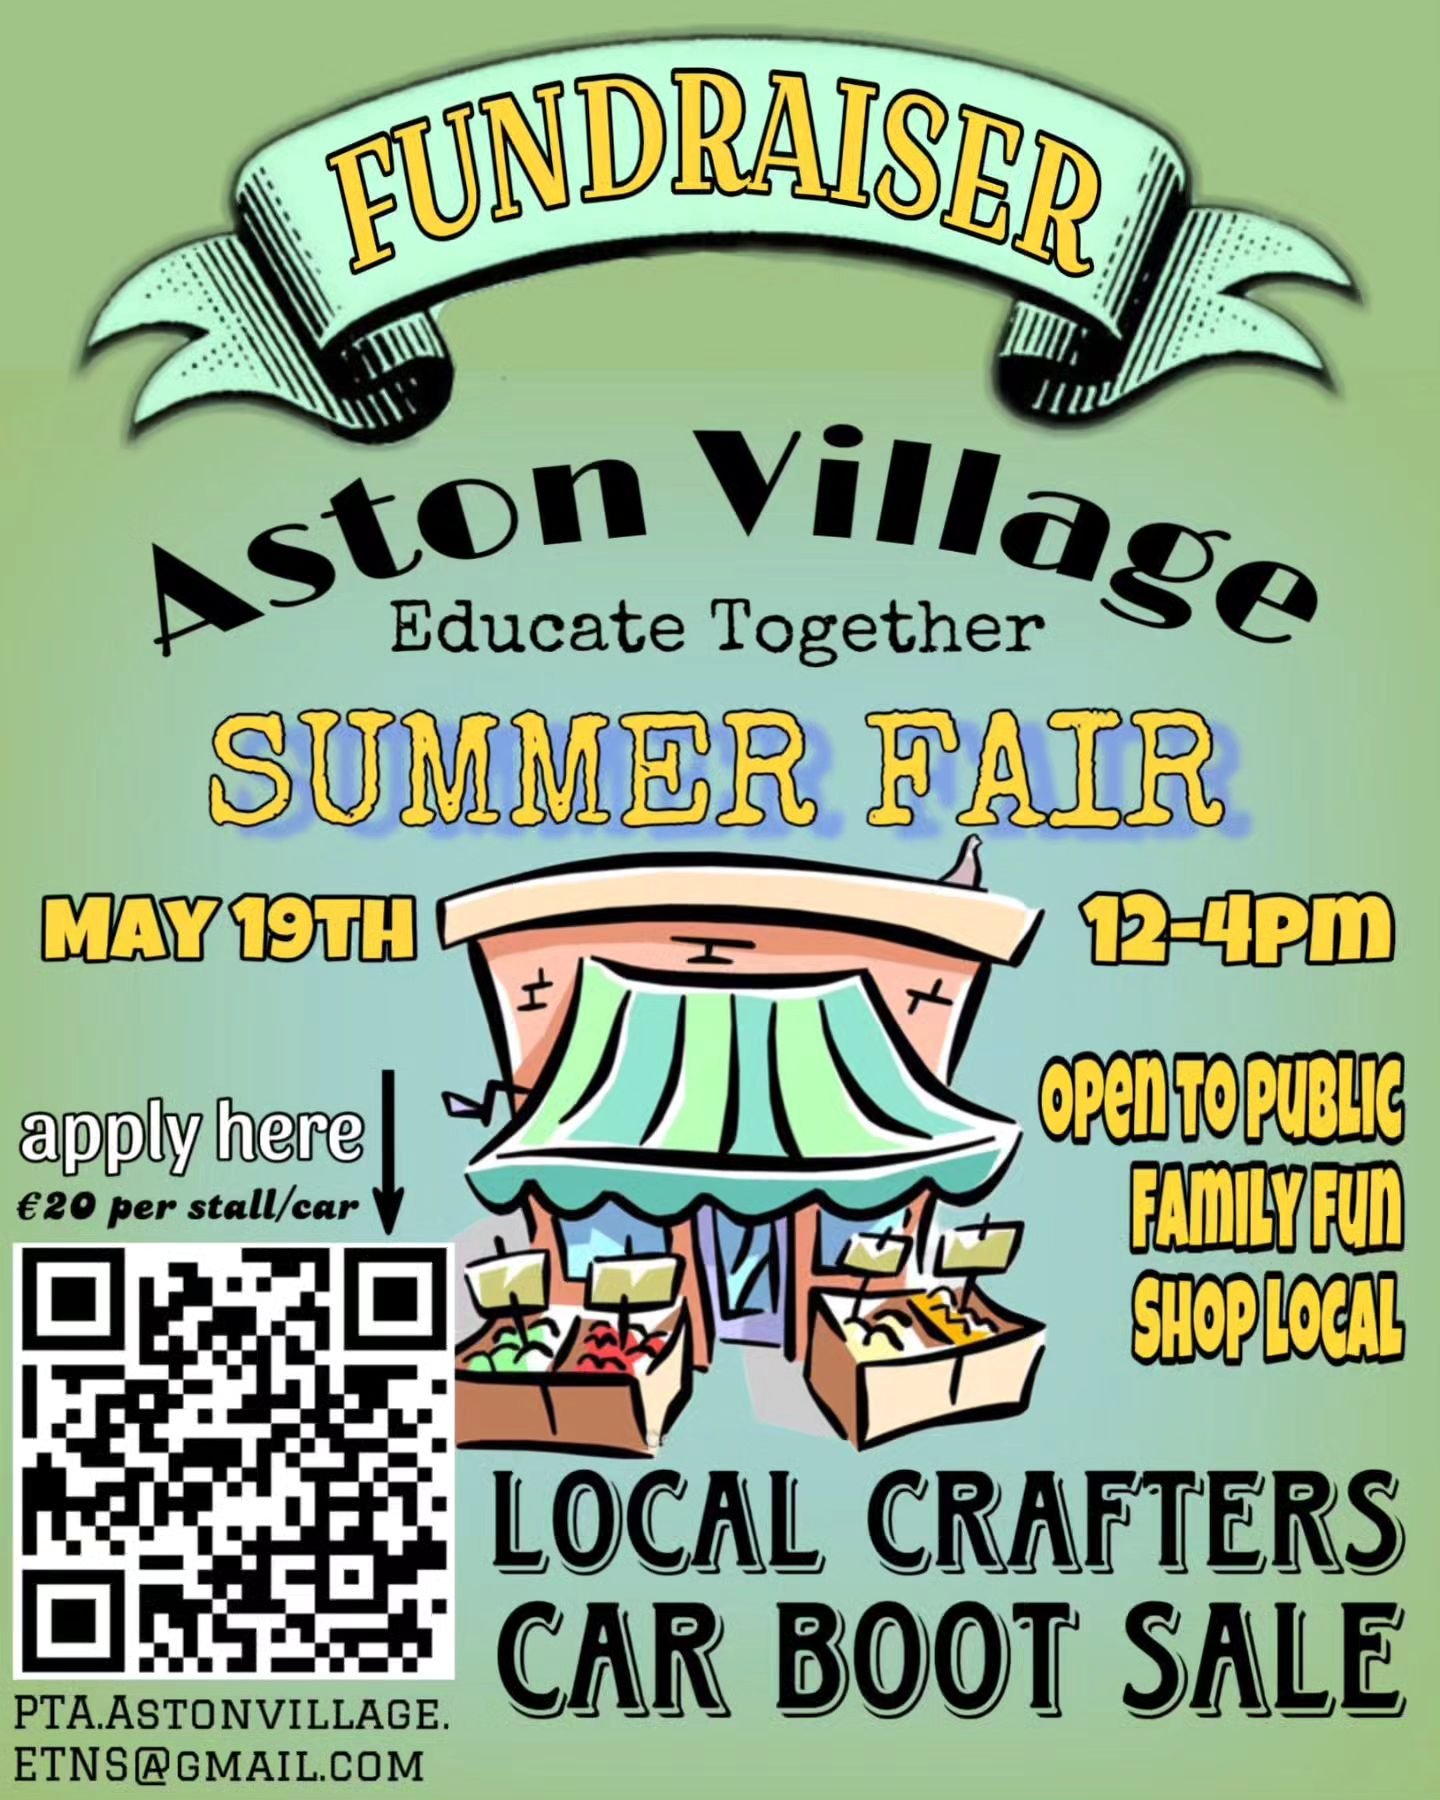 And on Sunday catch me at this great fundraising event for Aston village pta 12-4 #localloyalty